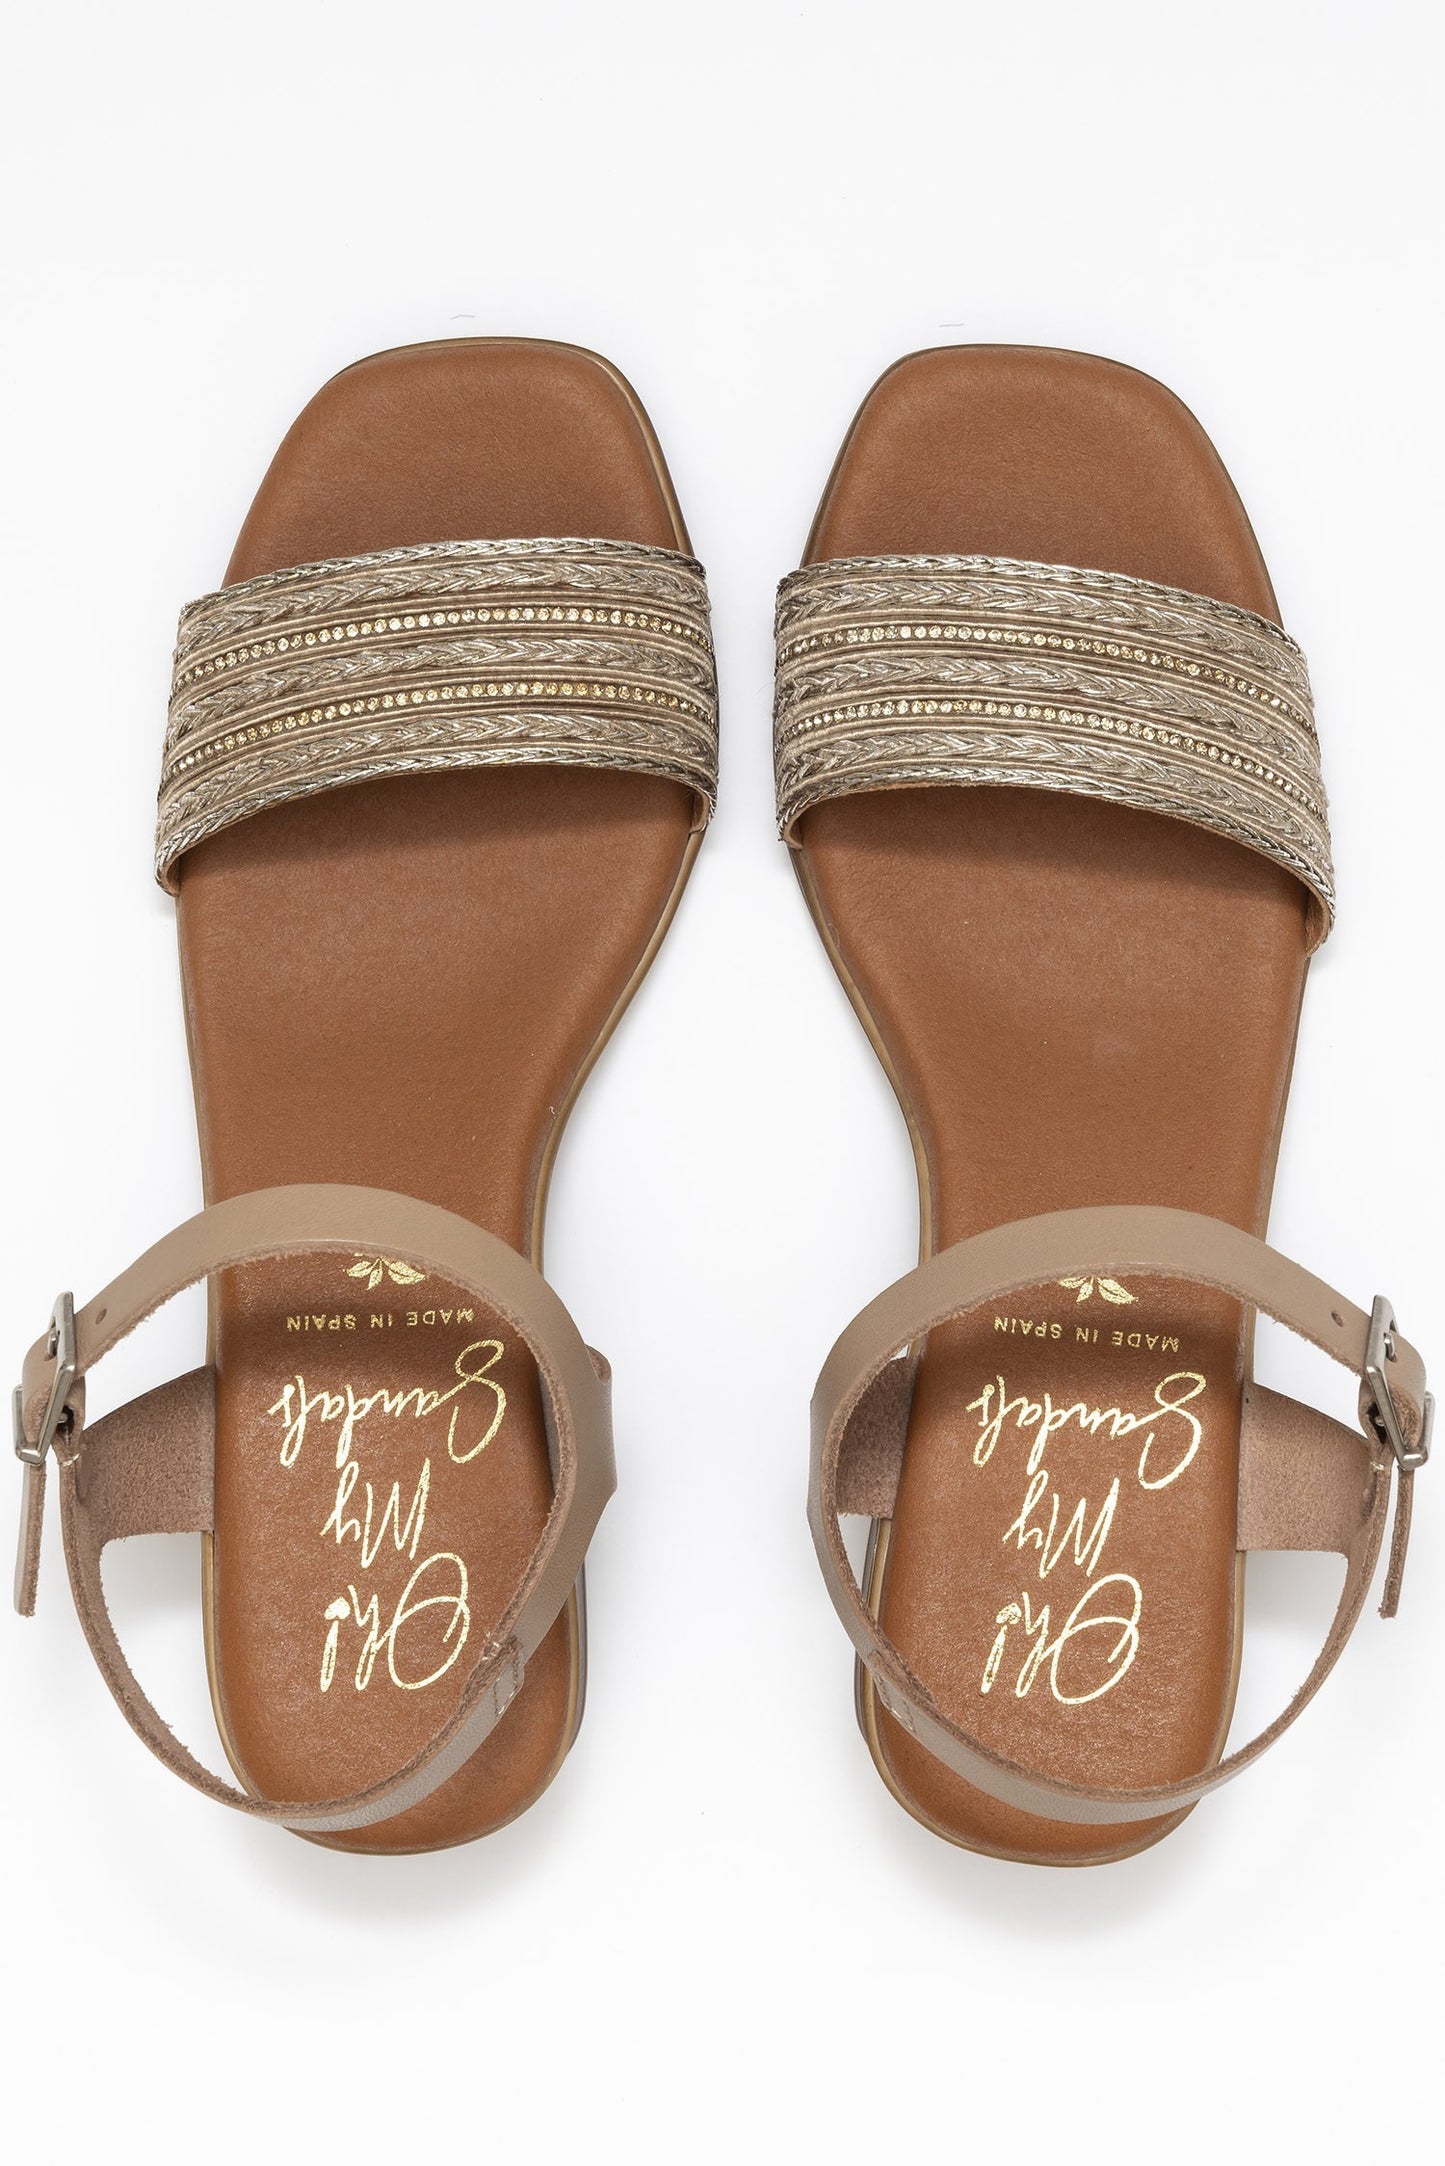 OH MY SANDALS 5498